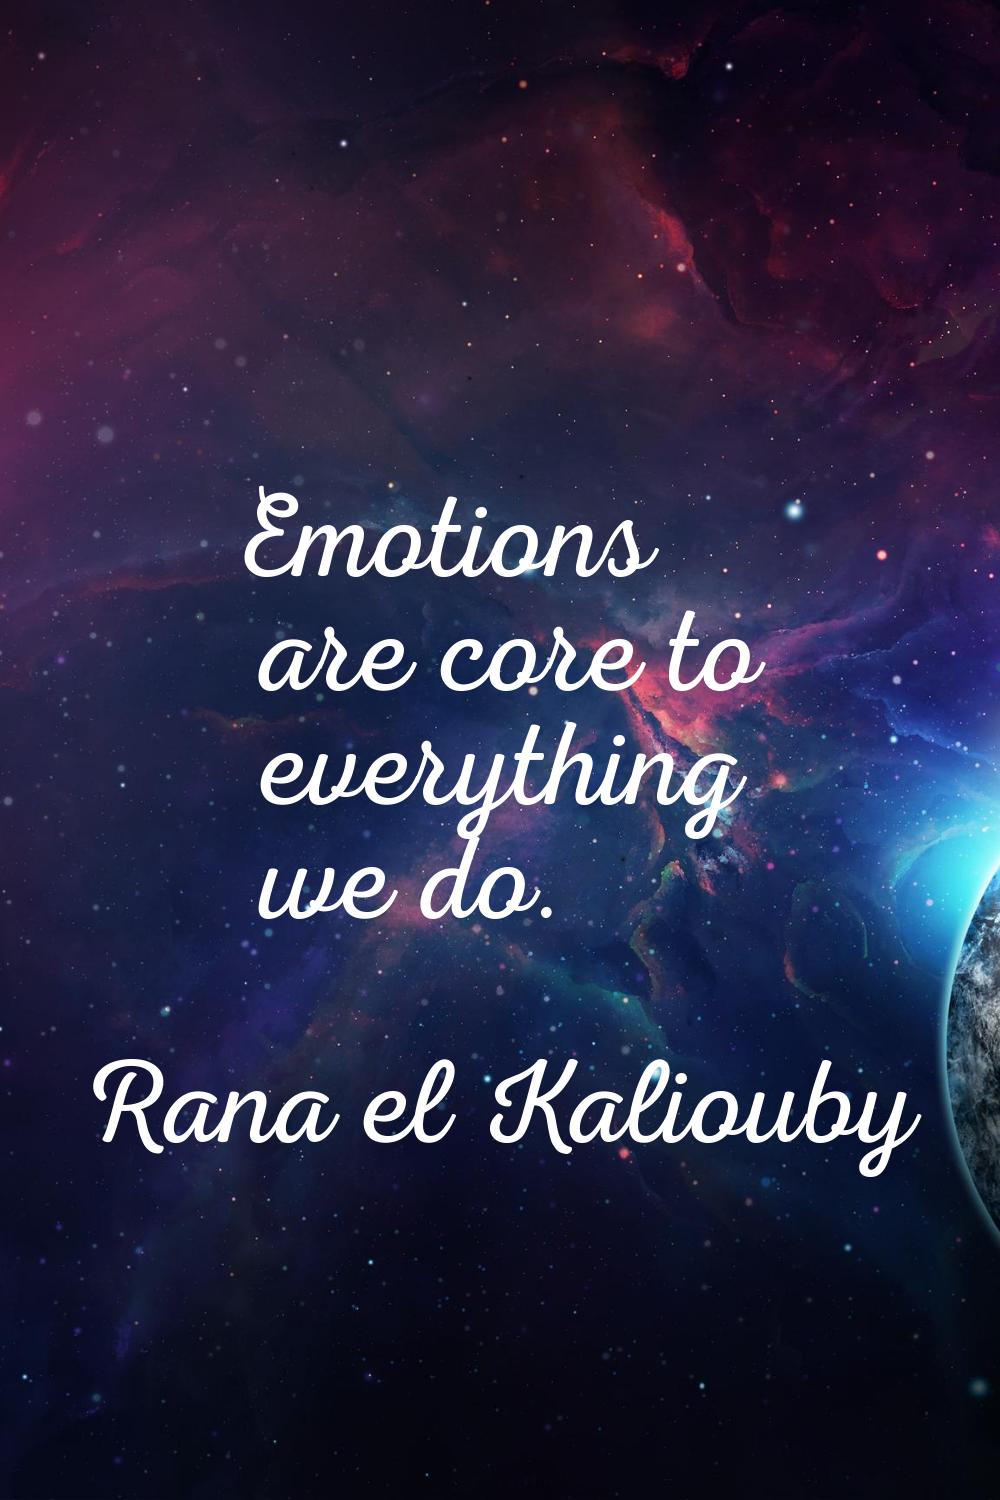 Emotions are core to everything we do.